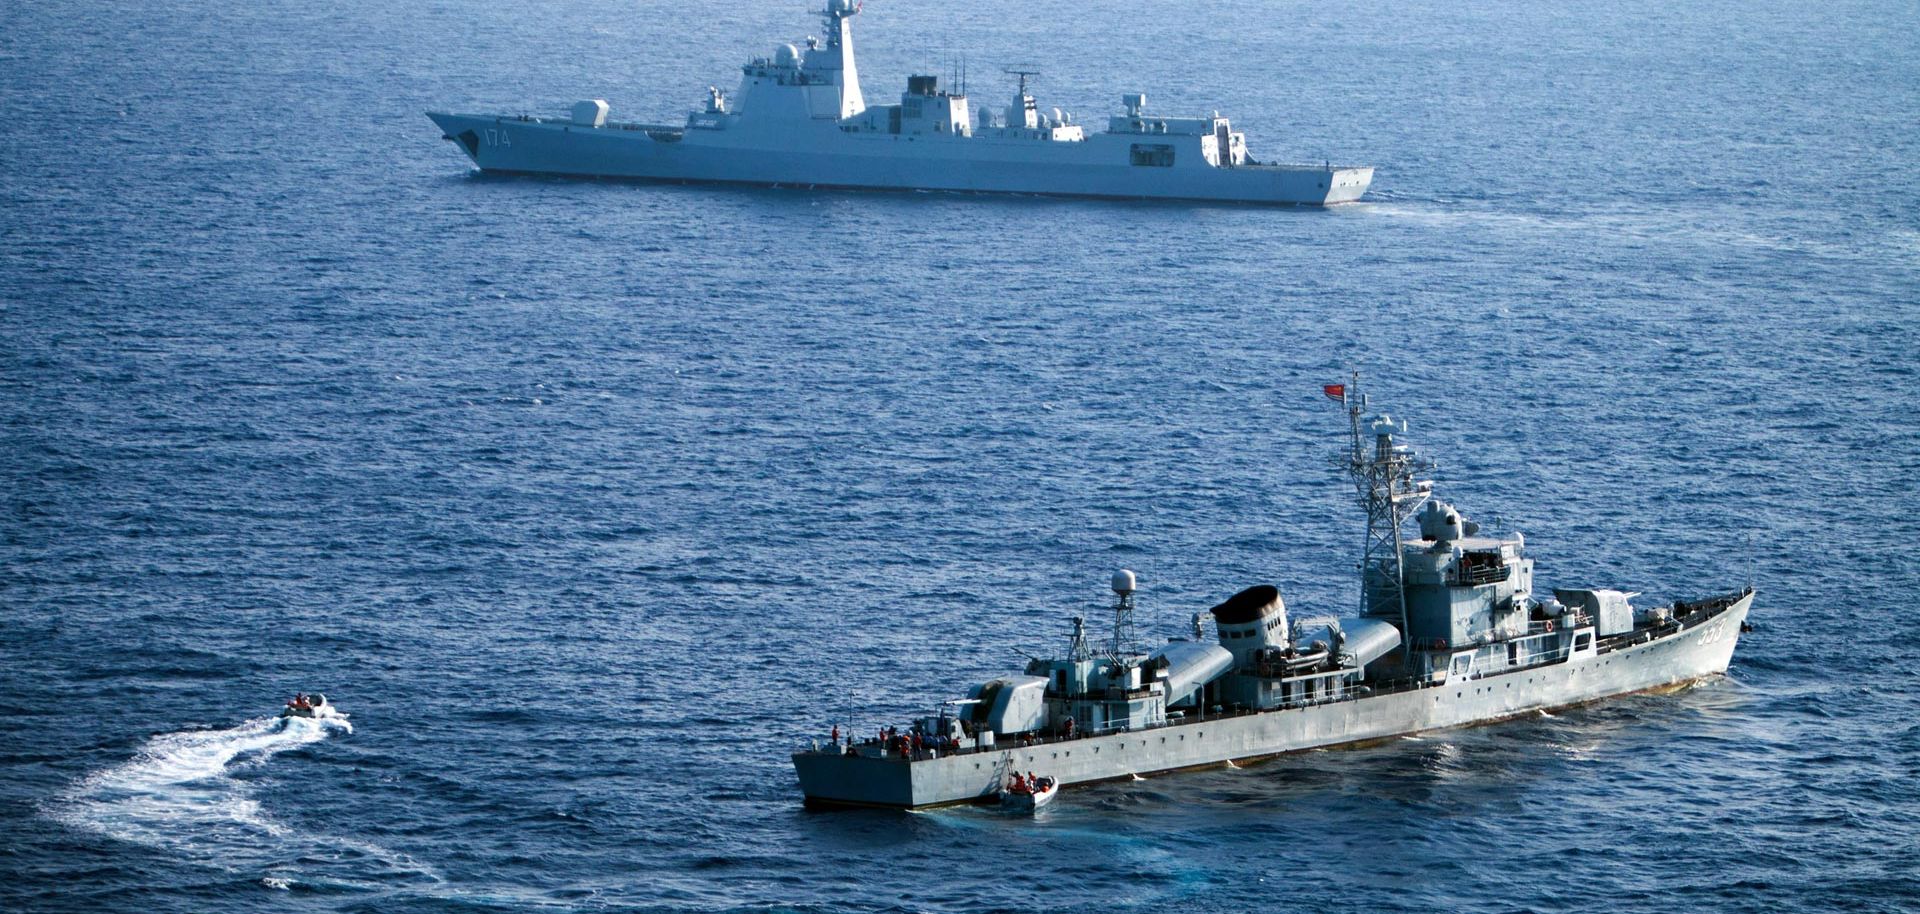 More Than Meets the Eye in the South China Sea